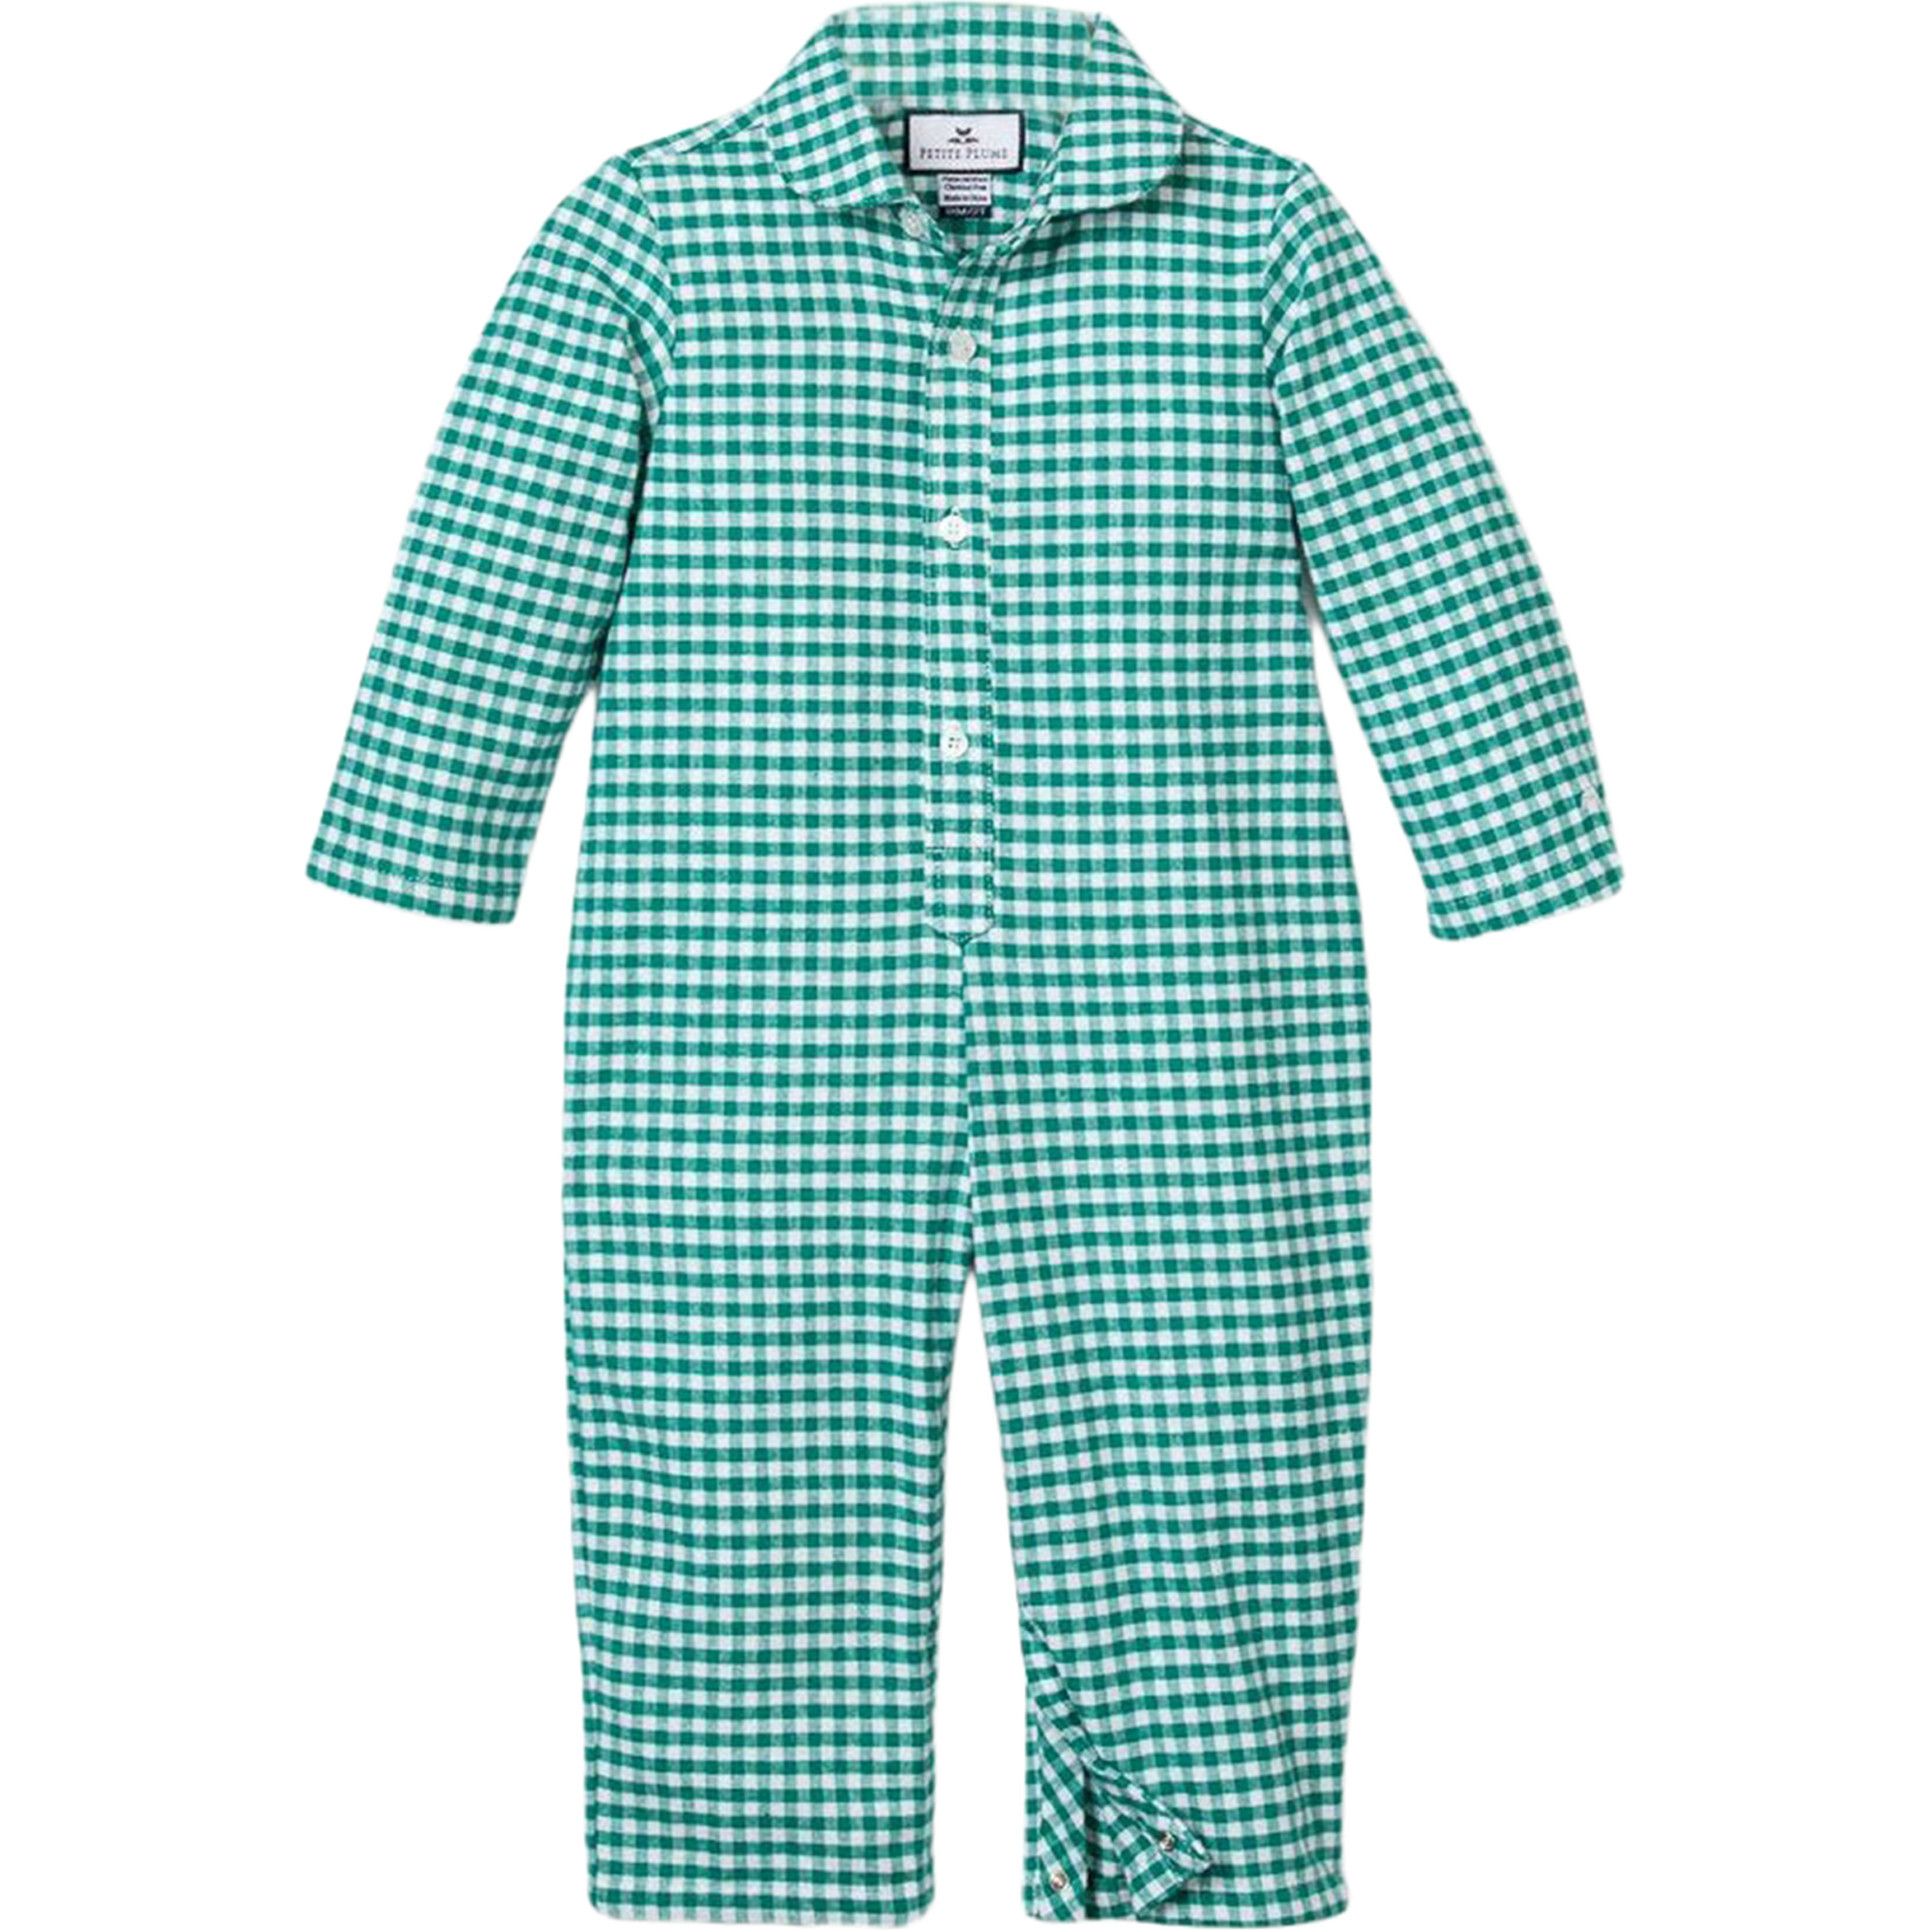 Green Gingham Flannel Romper with White Piping - Petite Plume Sleepwear